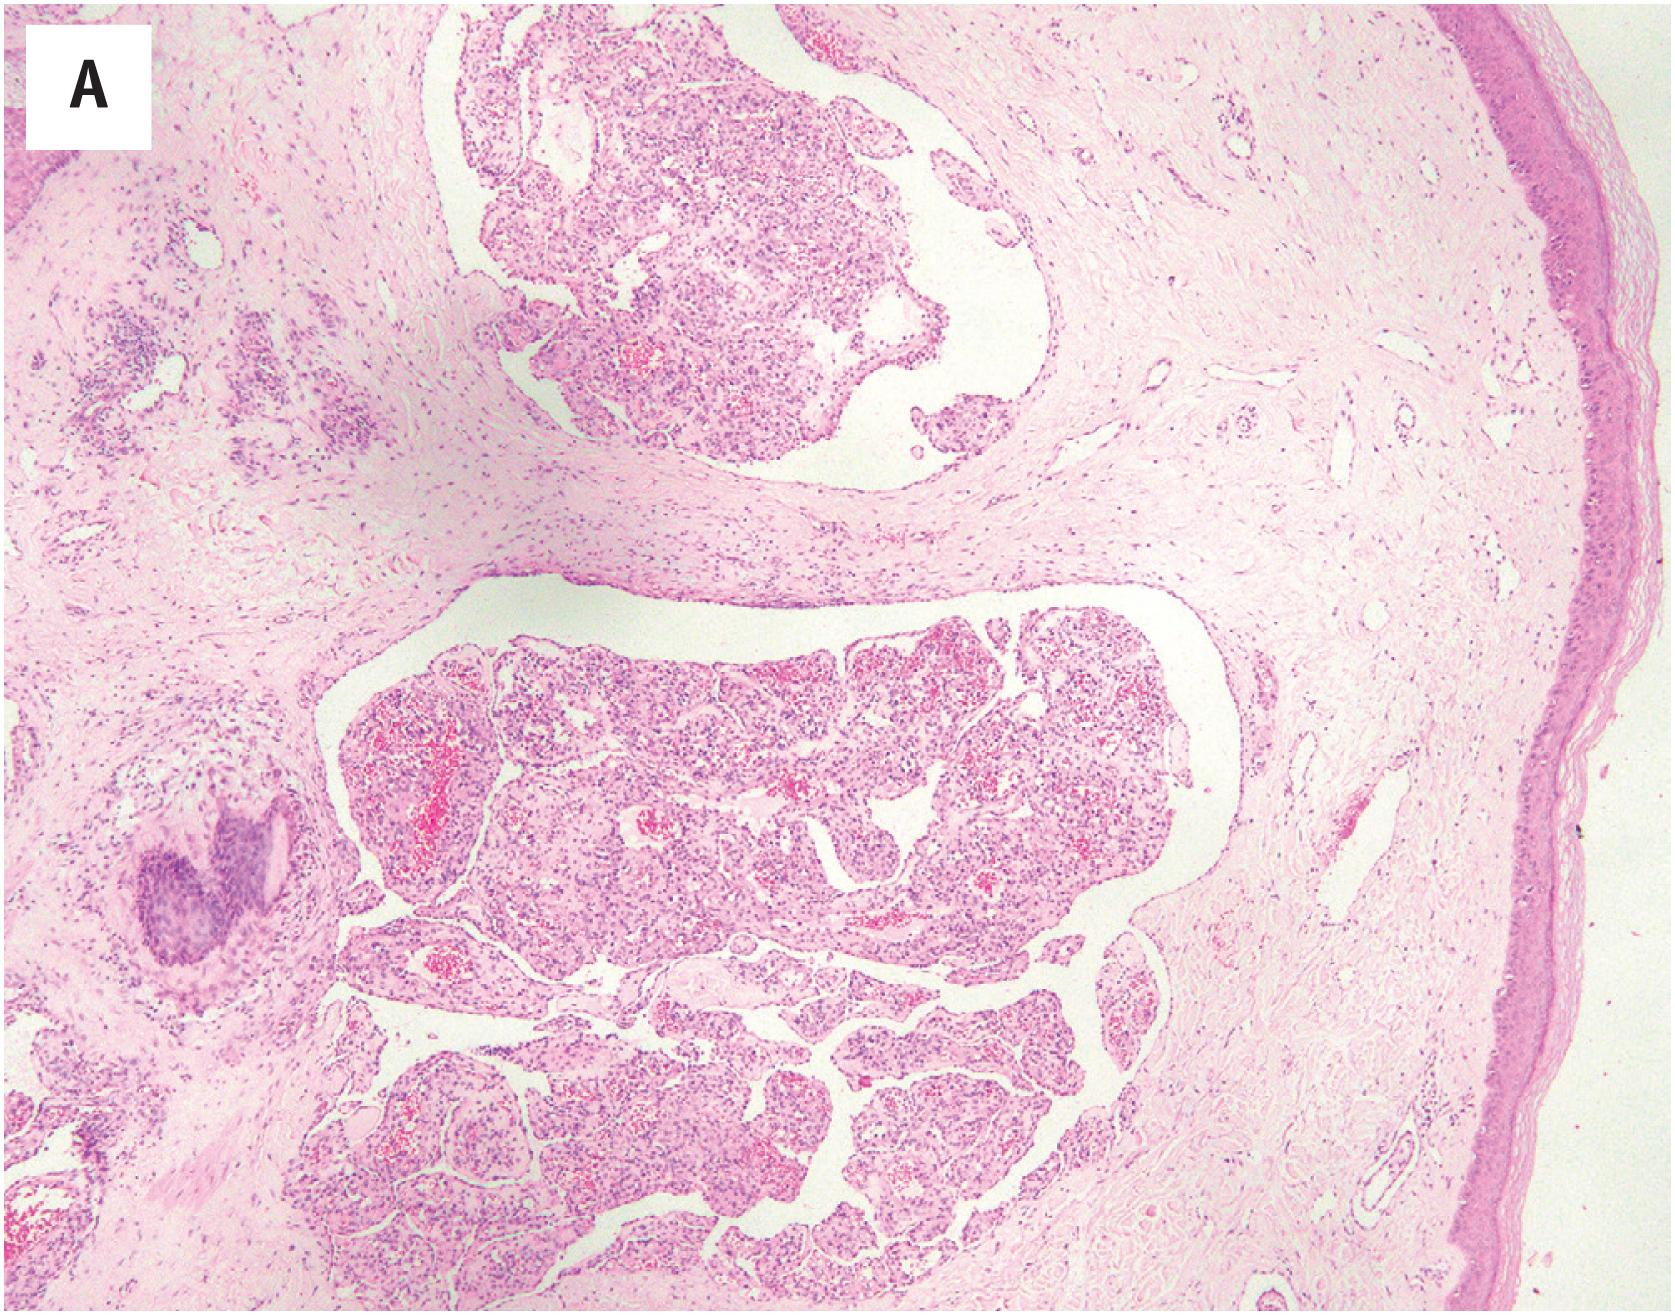 Fig. 10.9, (A) Glomeruloid hemangioma, consisting of an unusual intradermal proliferation of small capillary clusters, resembling glomeruli. (B) The papillae are lined by bland, plump endothelial cells containing intracytoplasmic globules. (C) PAS-D stain, highlighting the intracytoplasmic globules of polyphenotypic immunoglobulin.